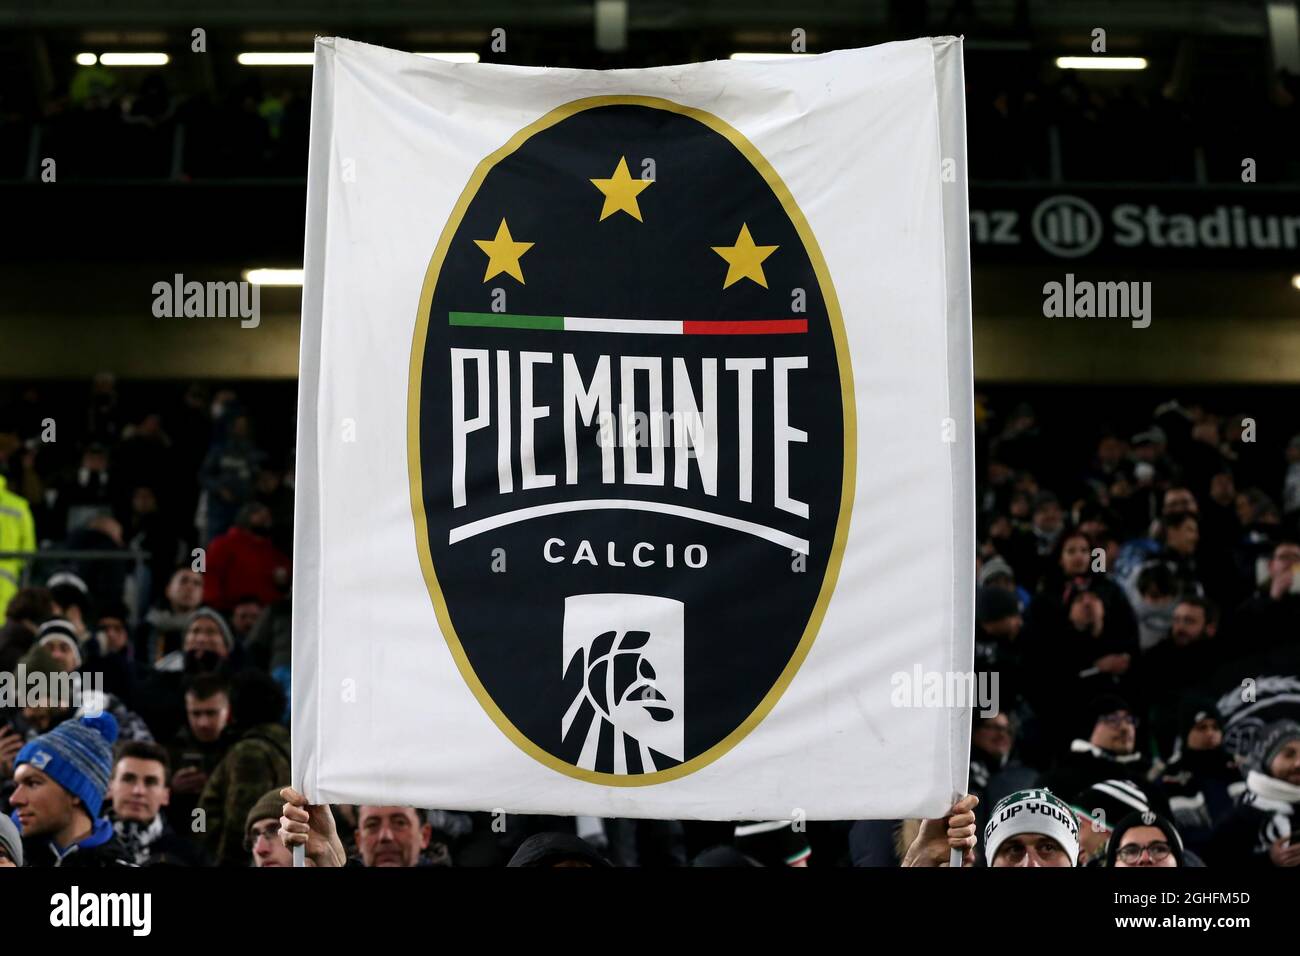 A Piemonte Calcio flag is held up ( Juventus is known as Piemonte Calcio on  FIFA 20 following a deal with Konami which prohibits the Juventus name to  be used on any